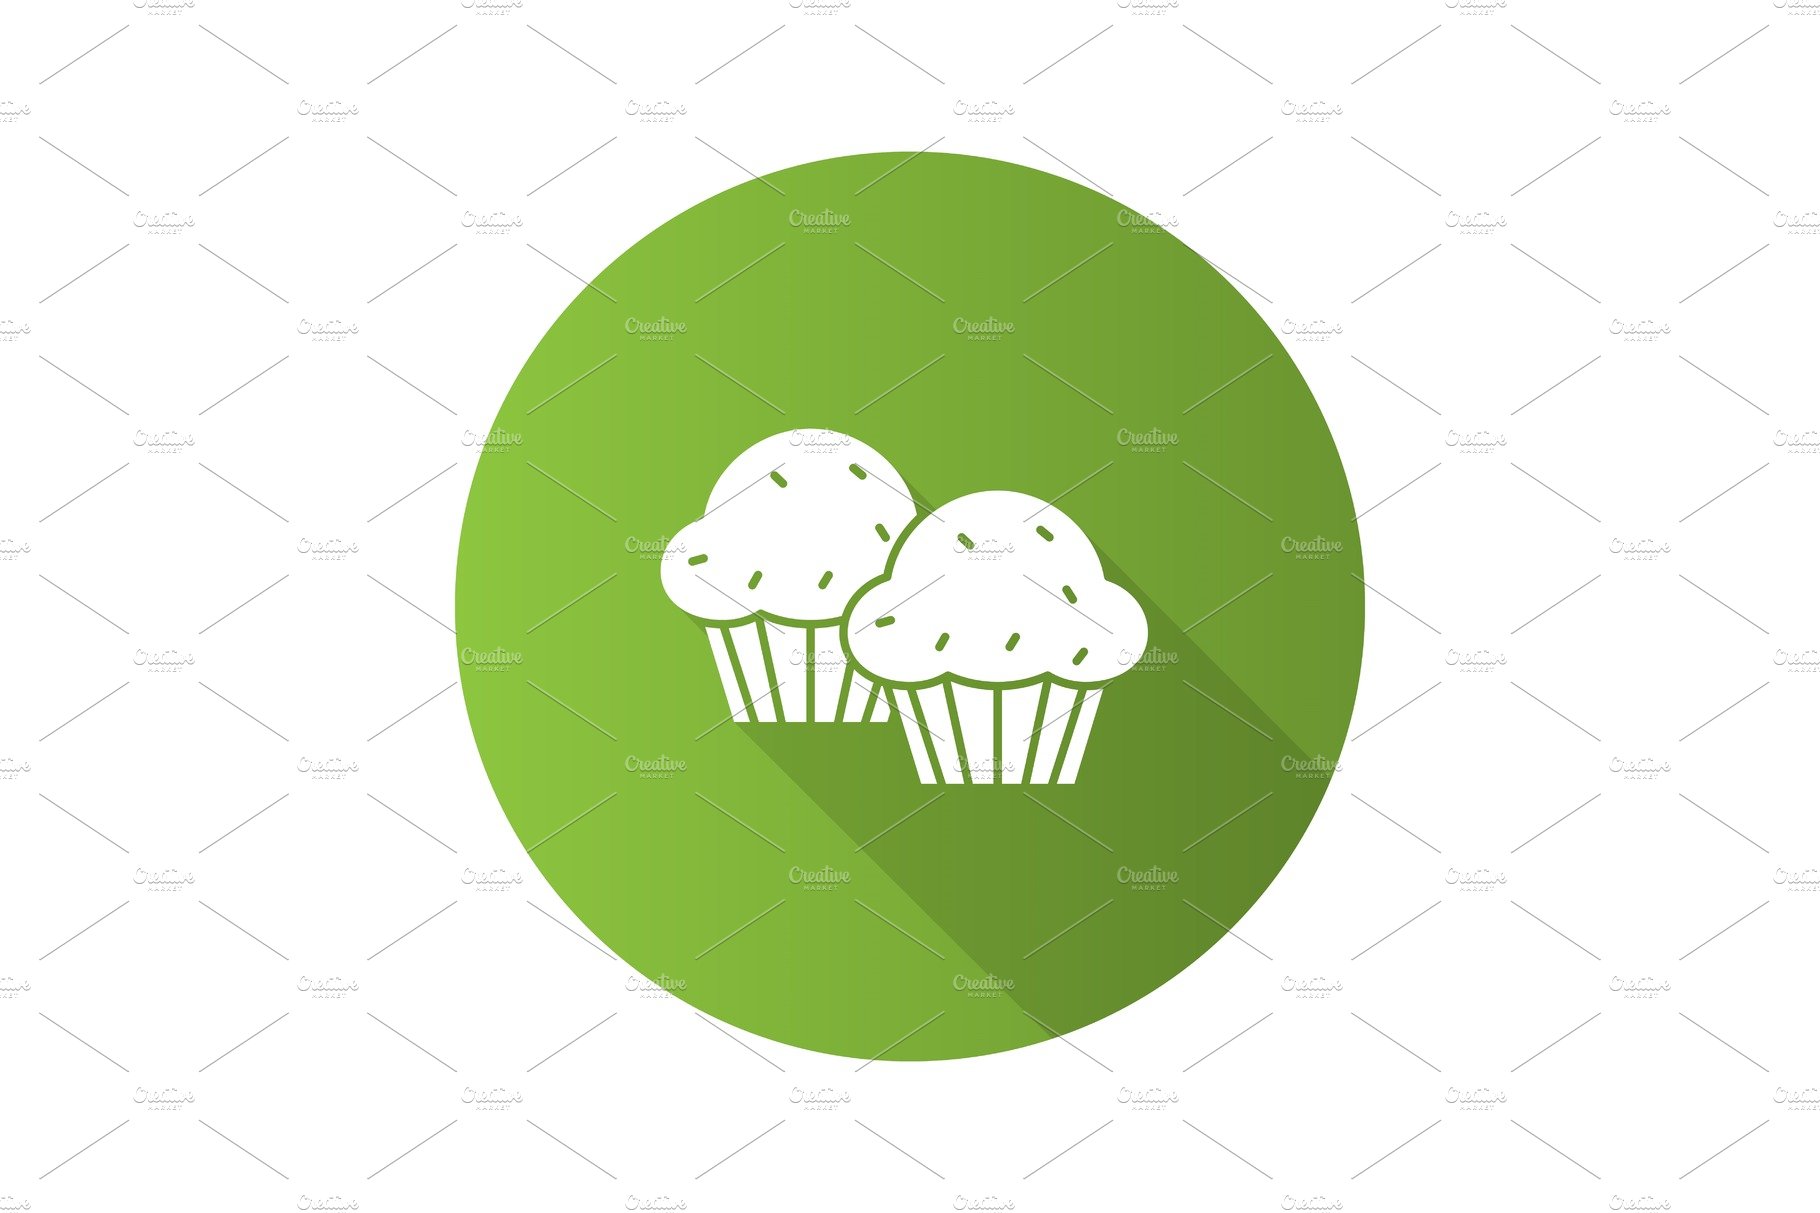 Cupcakes flat design long shadow glyph icon cover image.